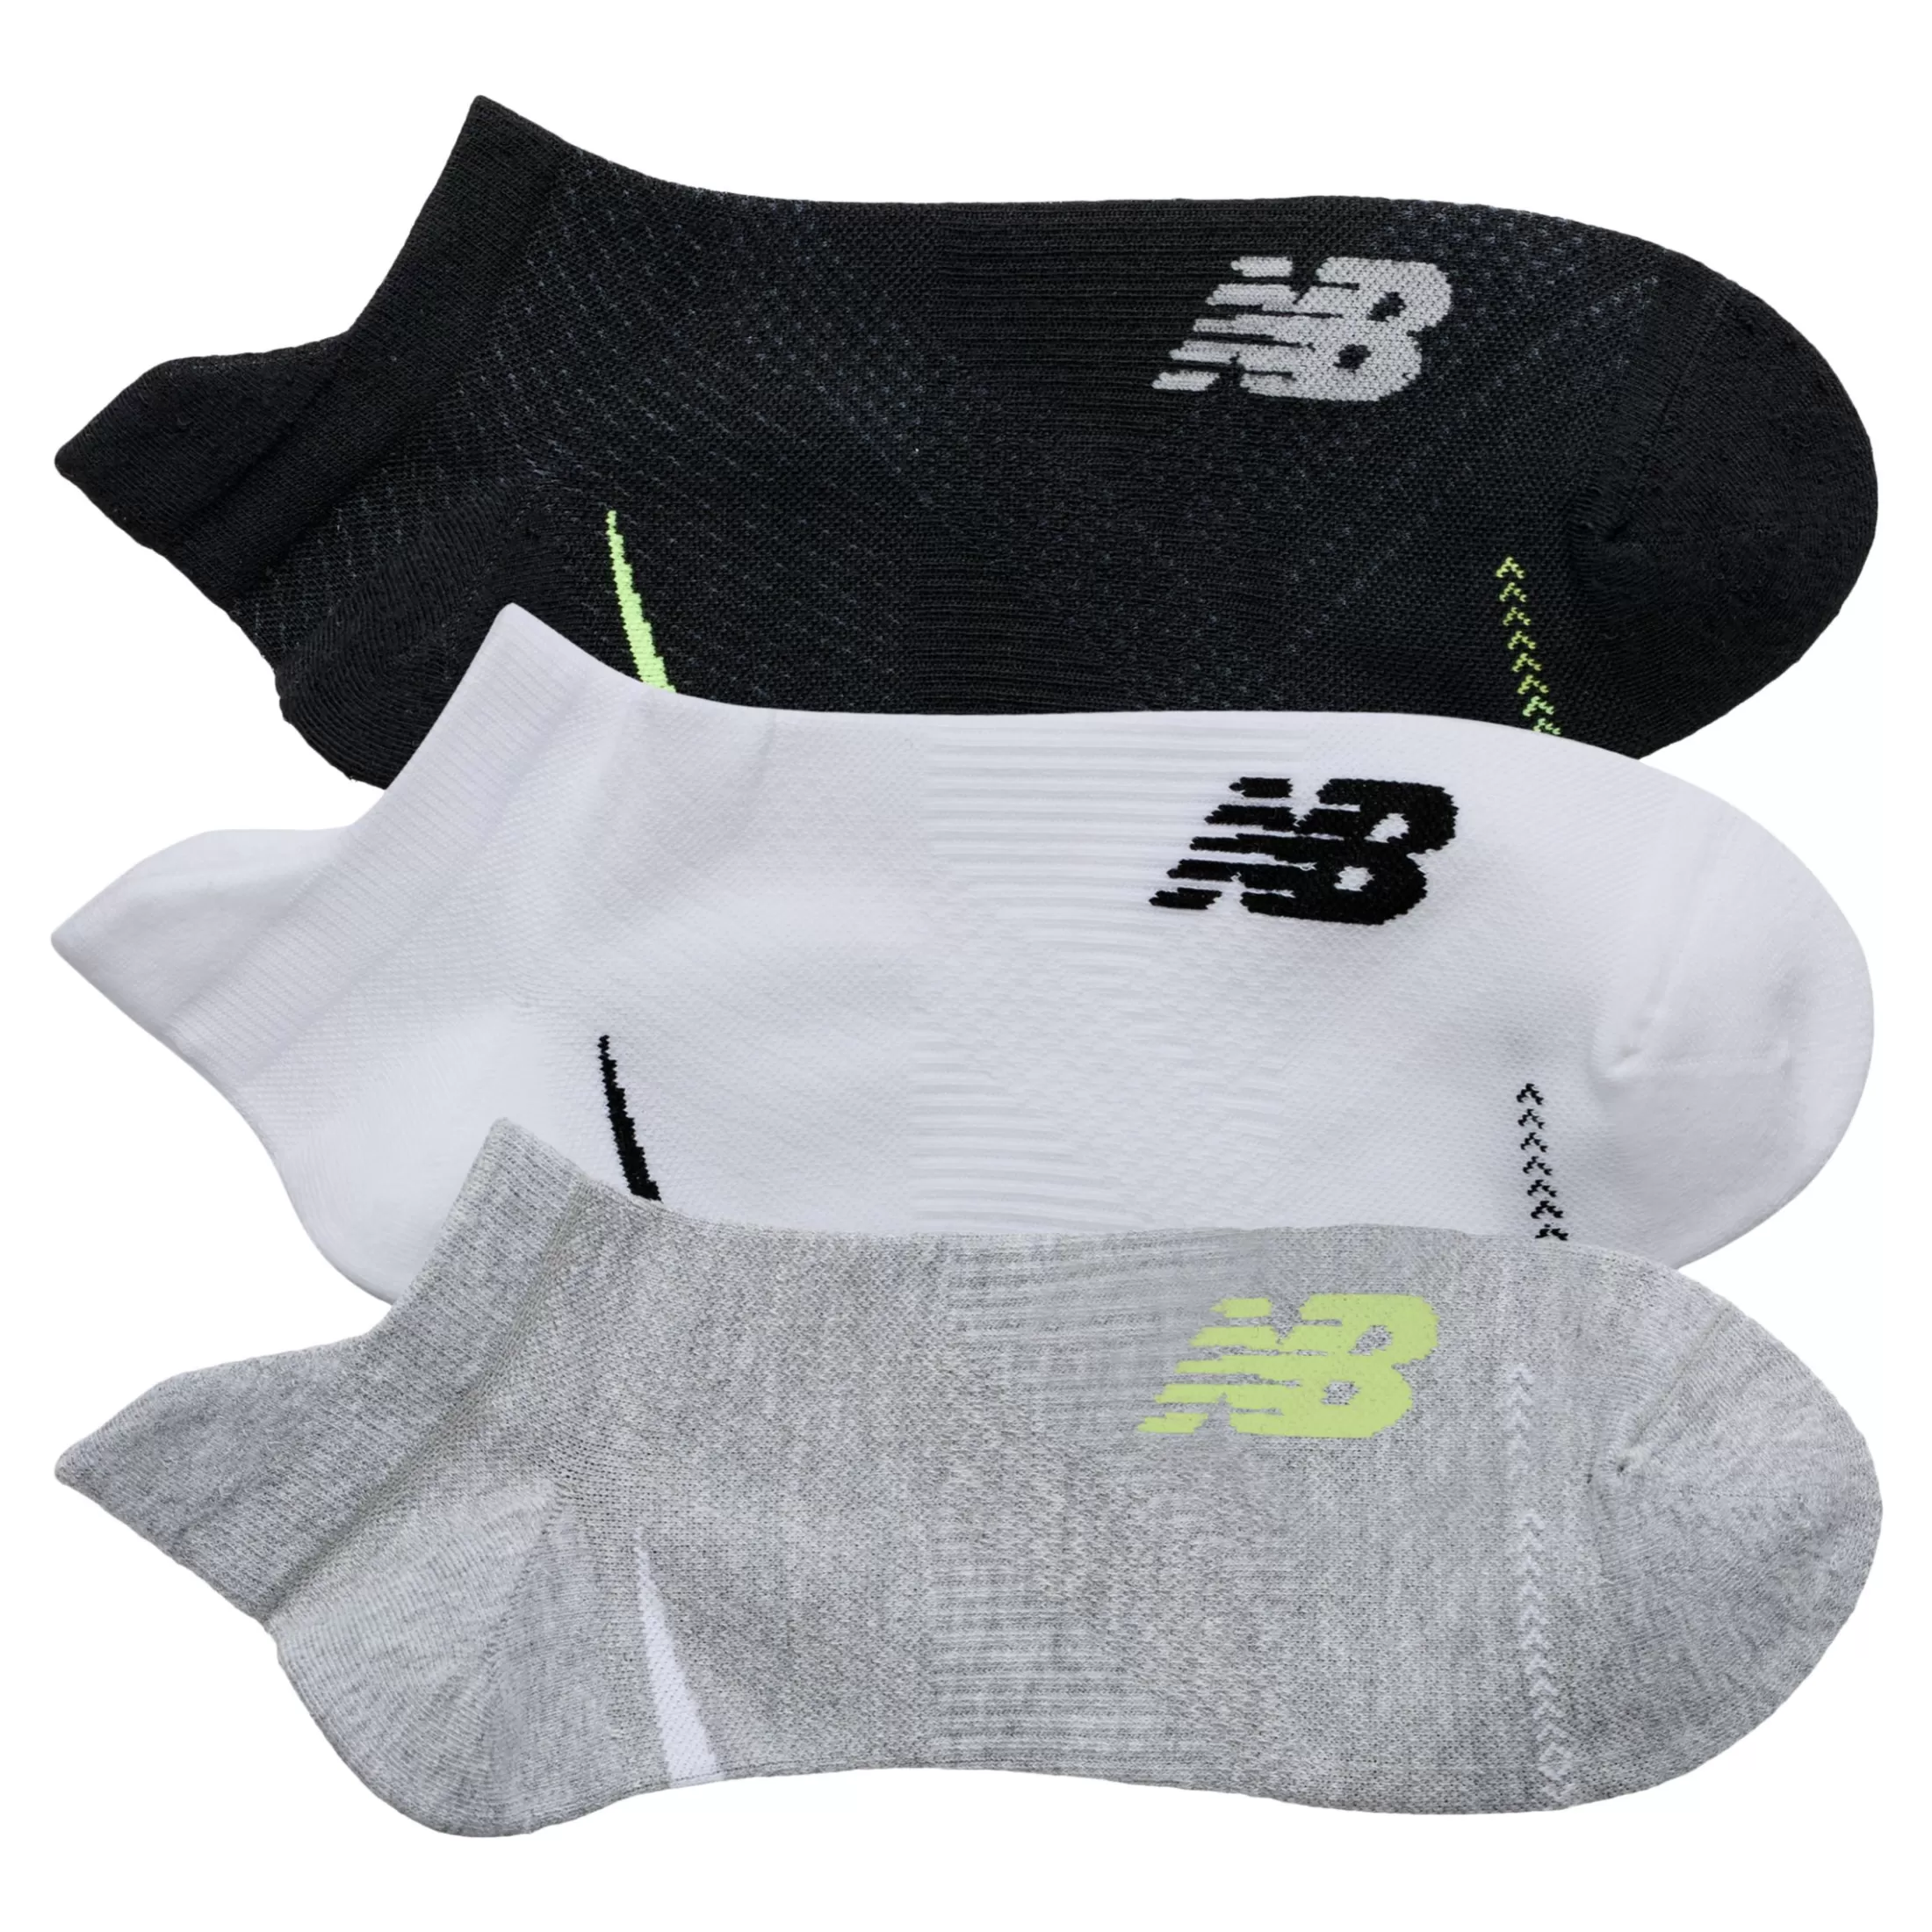 Best Sale Unisex Running Repreve No Show Tab 3 Pack MULHER/HOMEN Socks | All Accessories